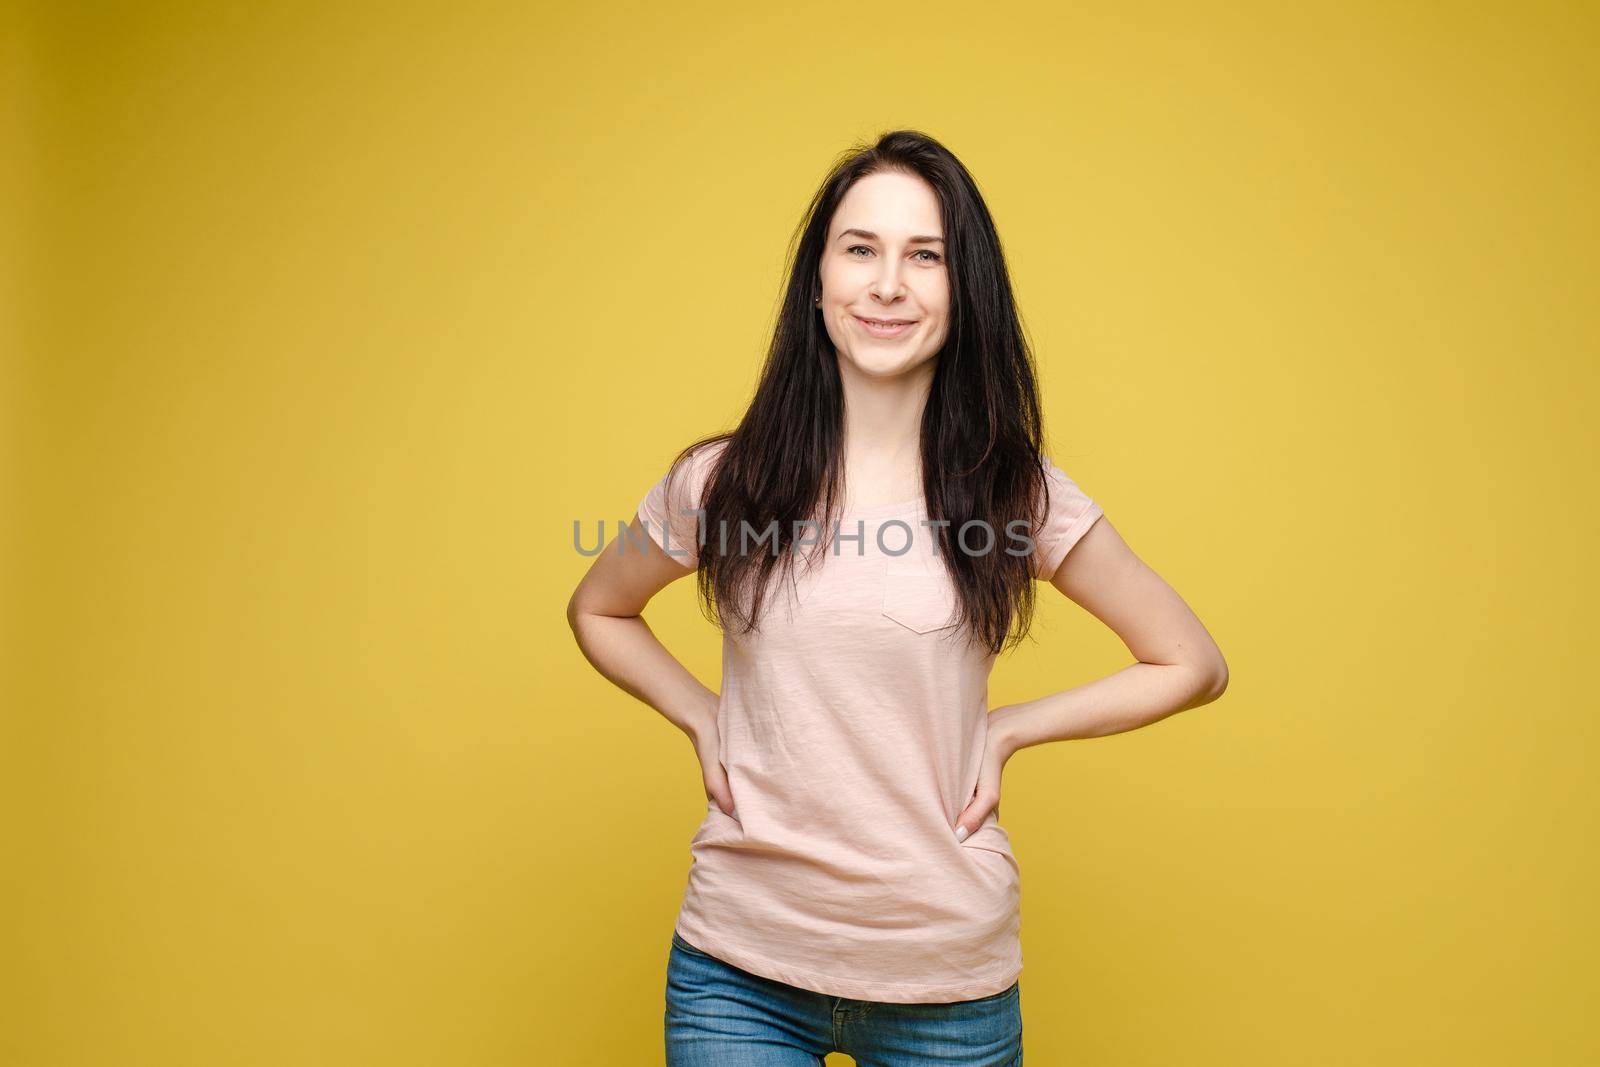 Slim woman wearing white shirt and jeans standing steady by StudioLucky